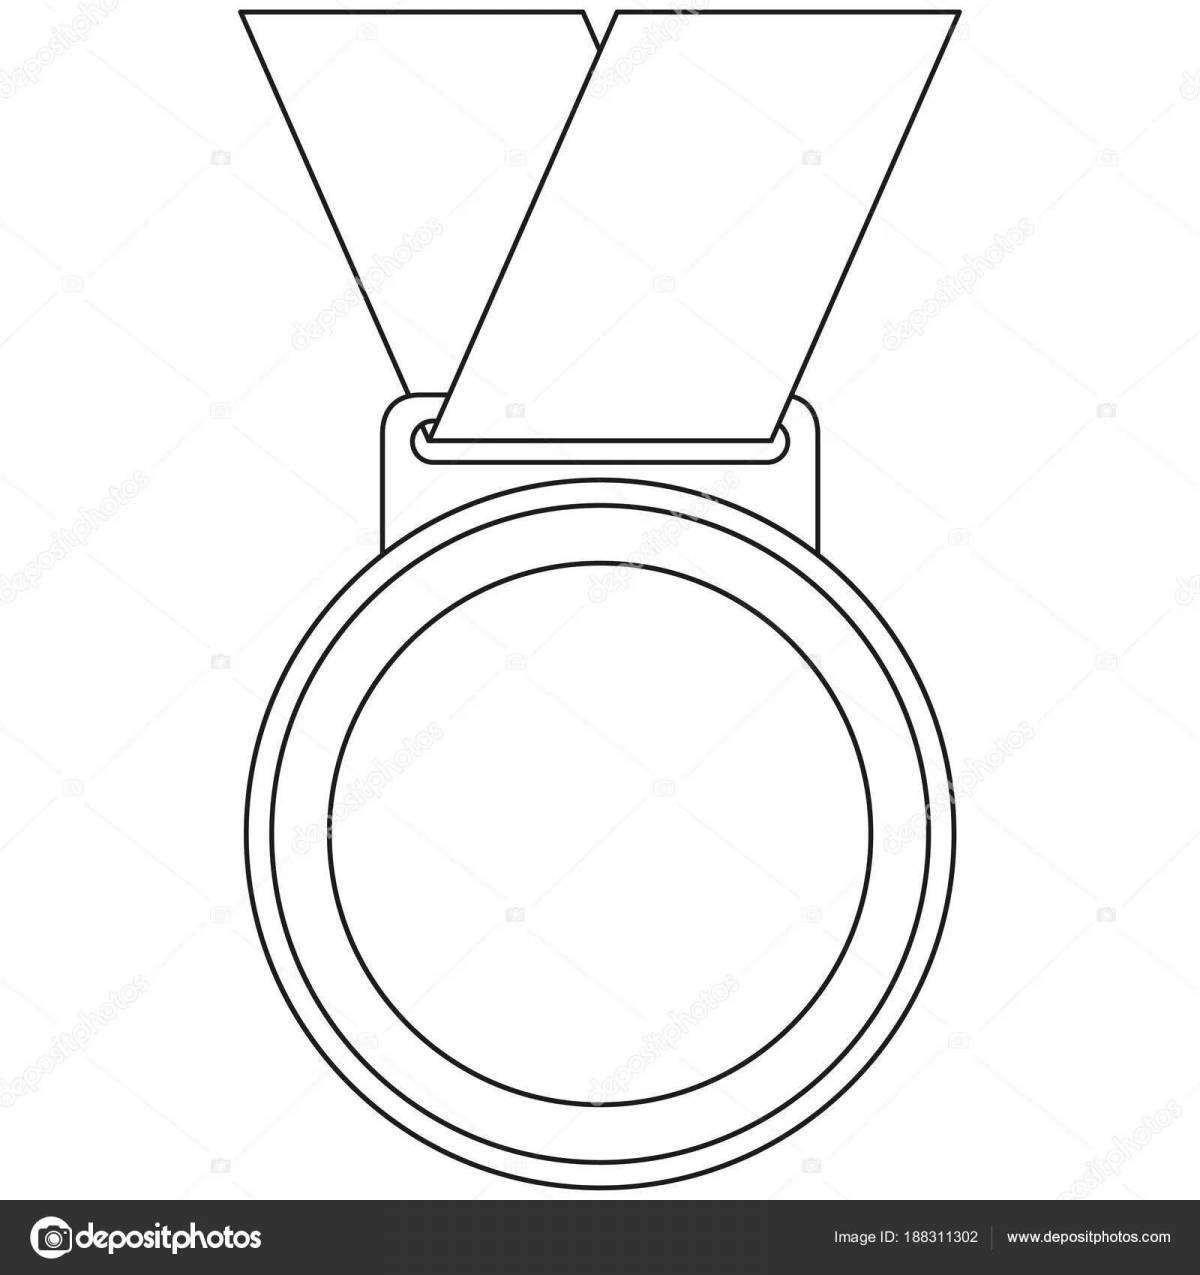 Glowing medal coloring page